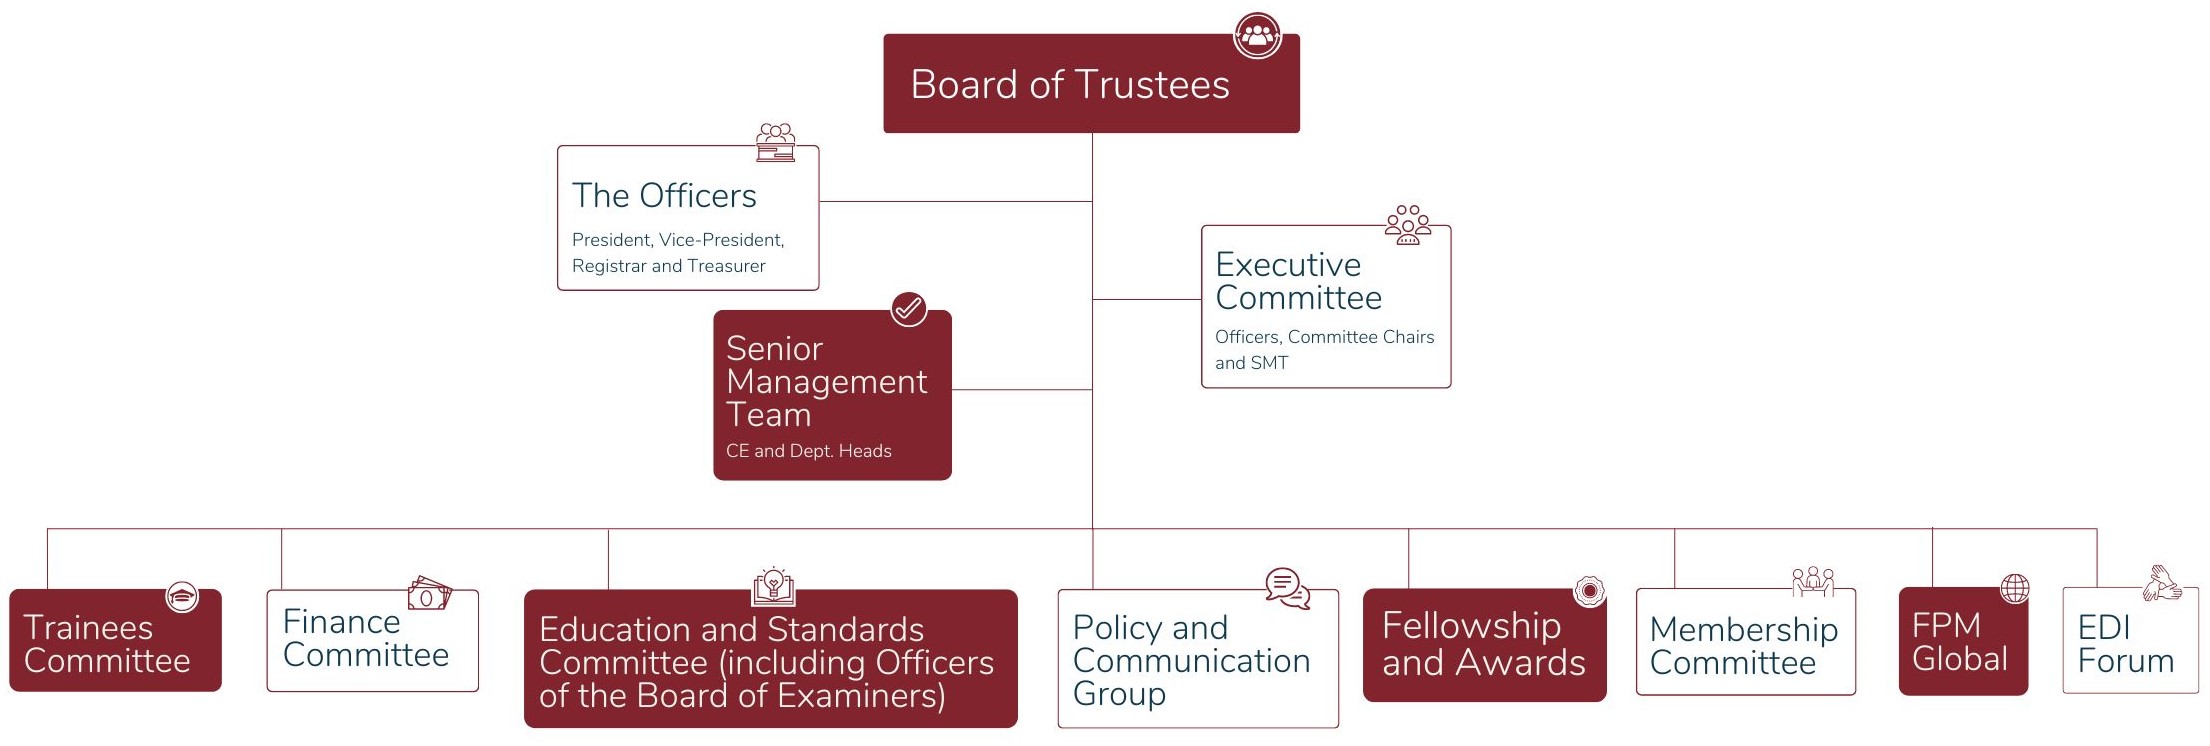 Image of the FPM committee structure